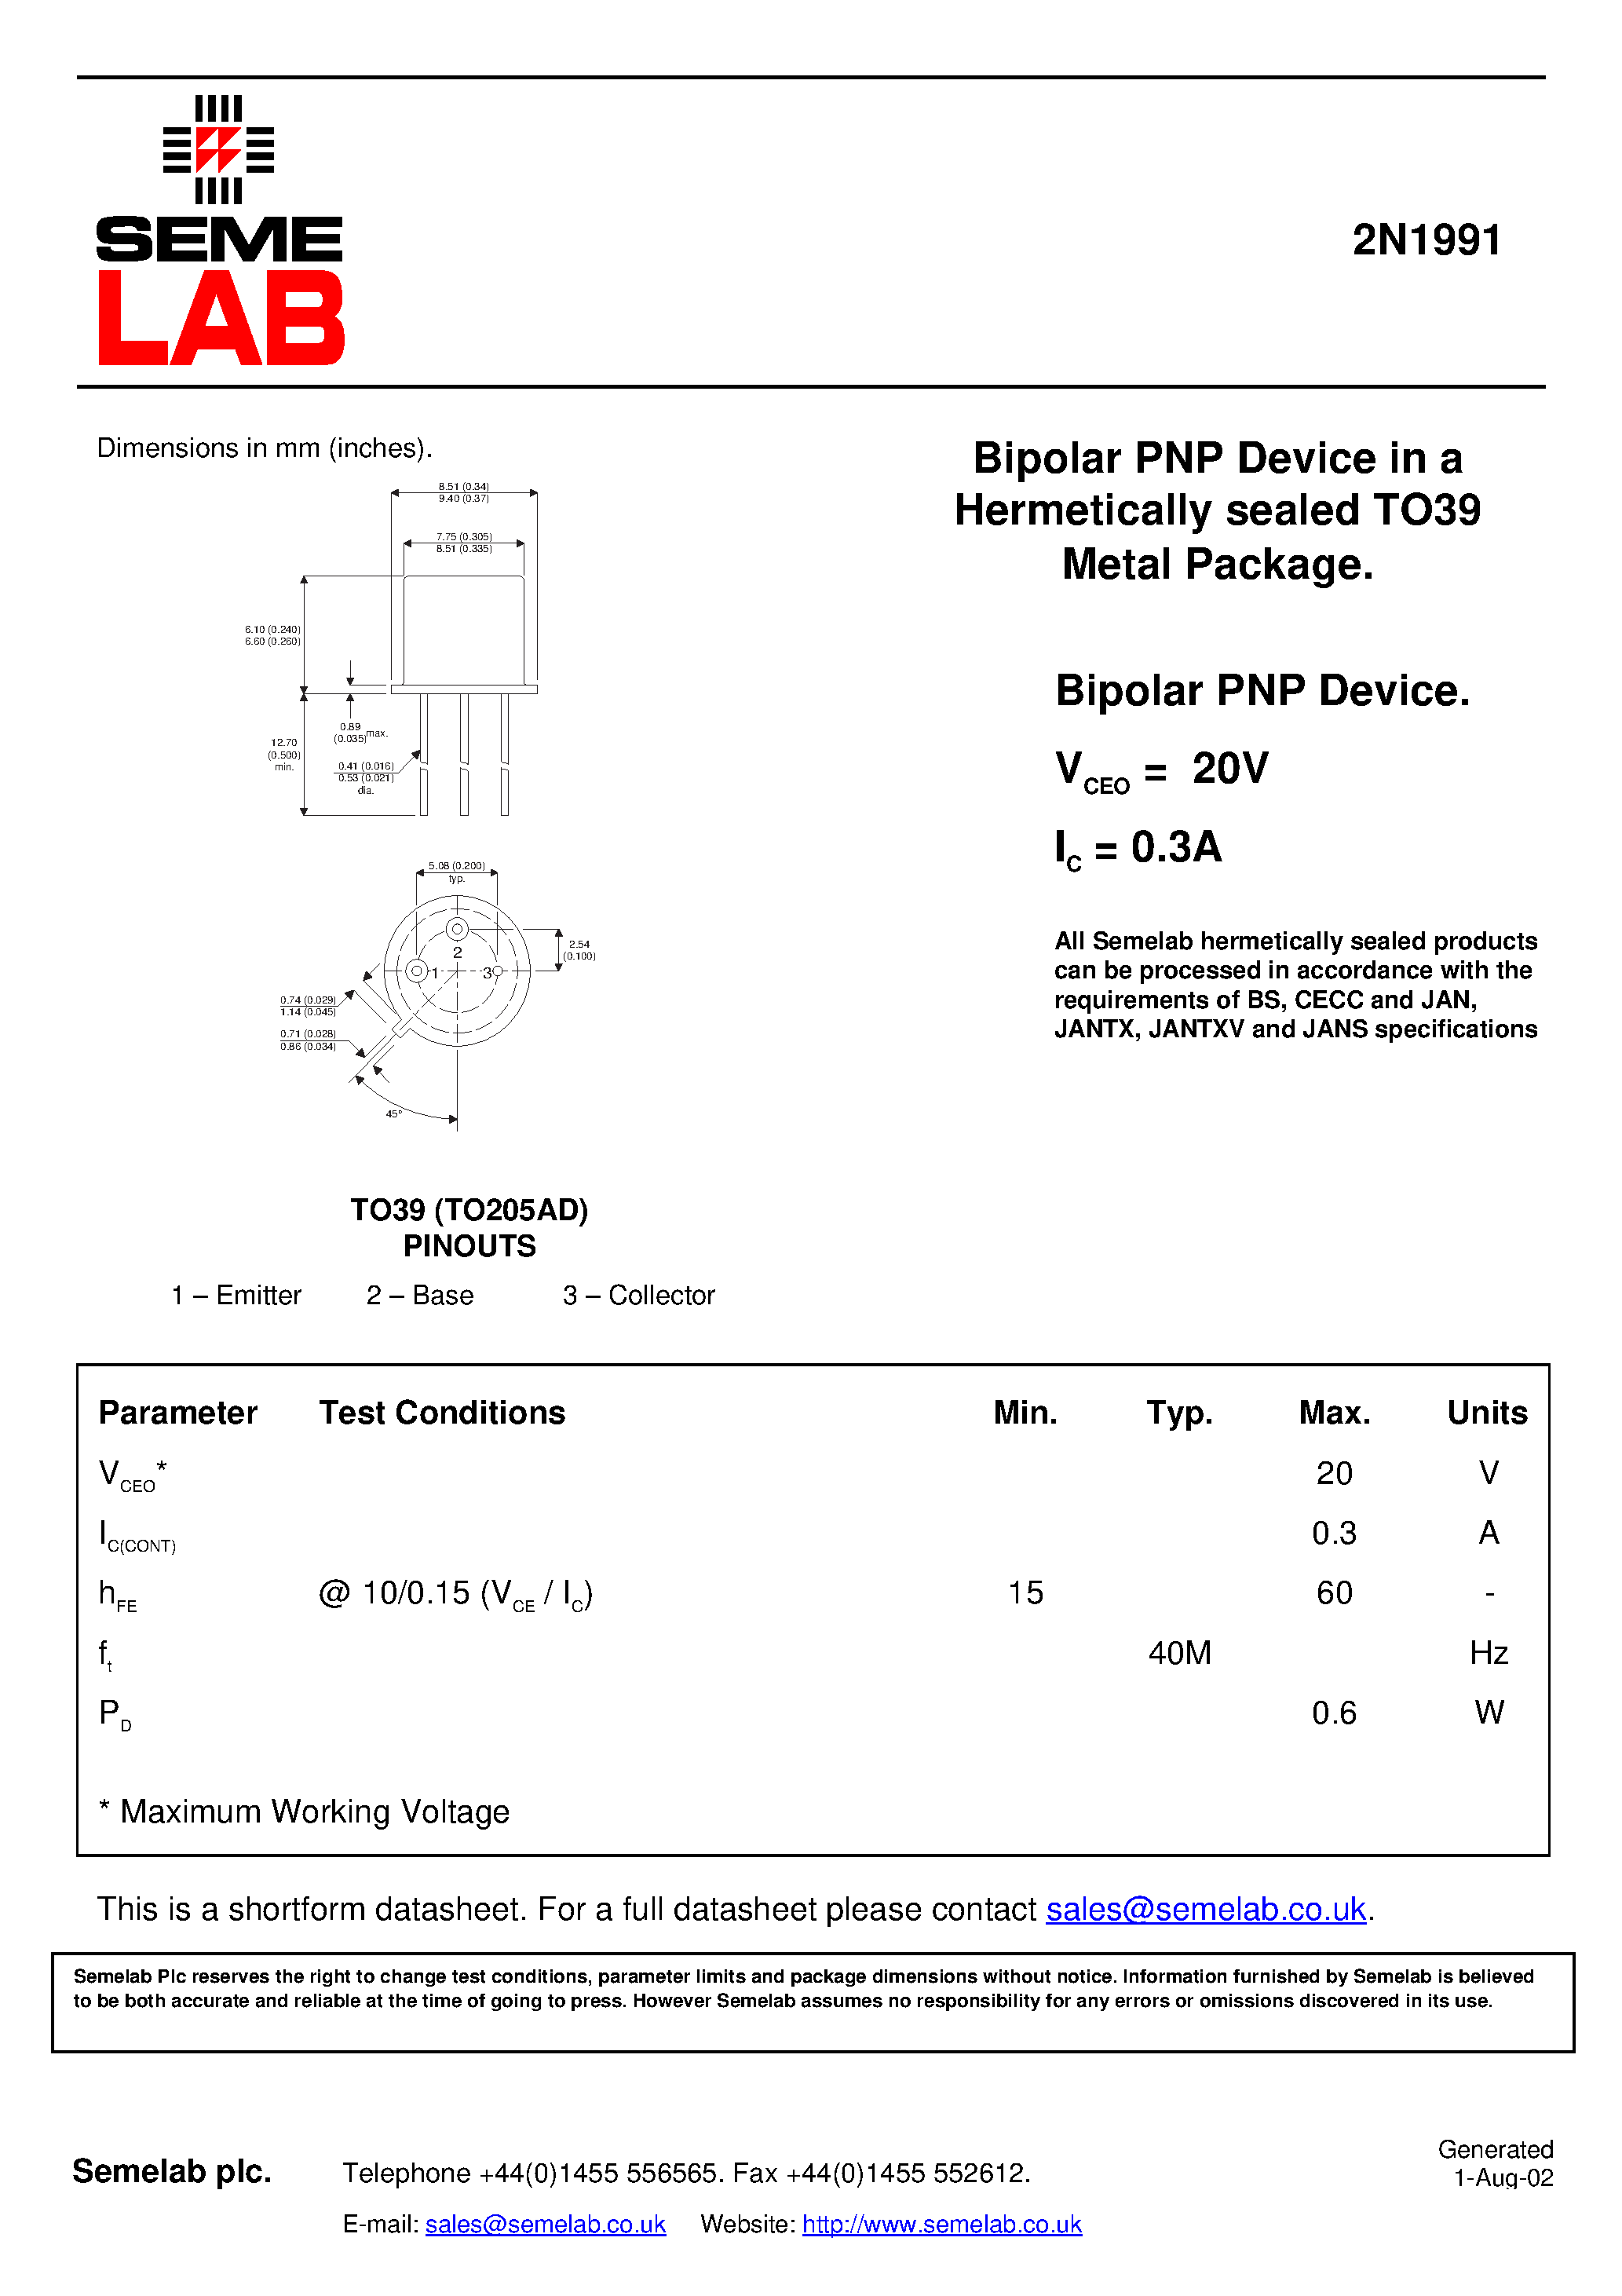 Datasheet 2N1991 - Bipolar PNP Device in a Hermetically sealed TO39 Metal Package page 1